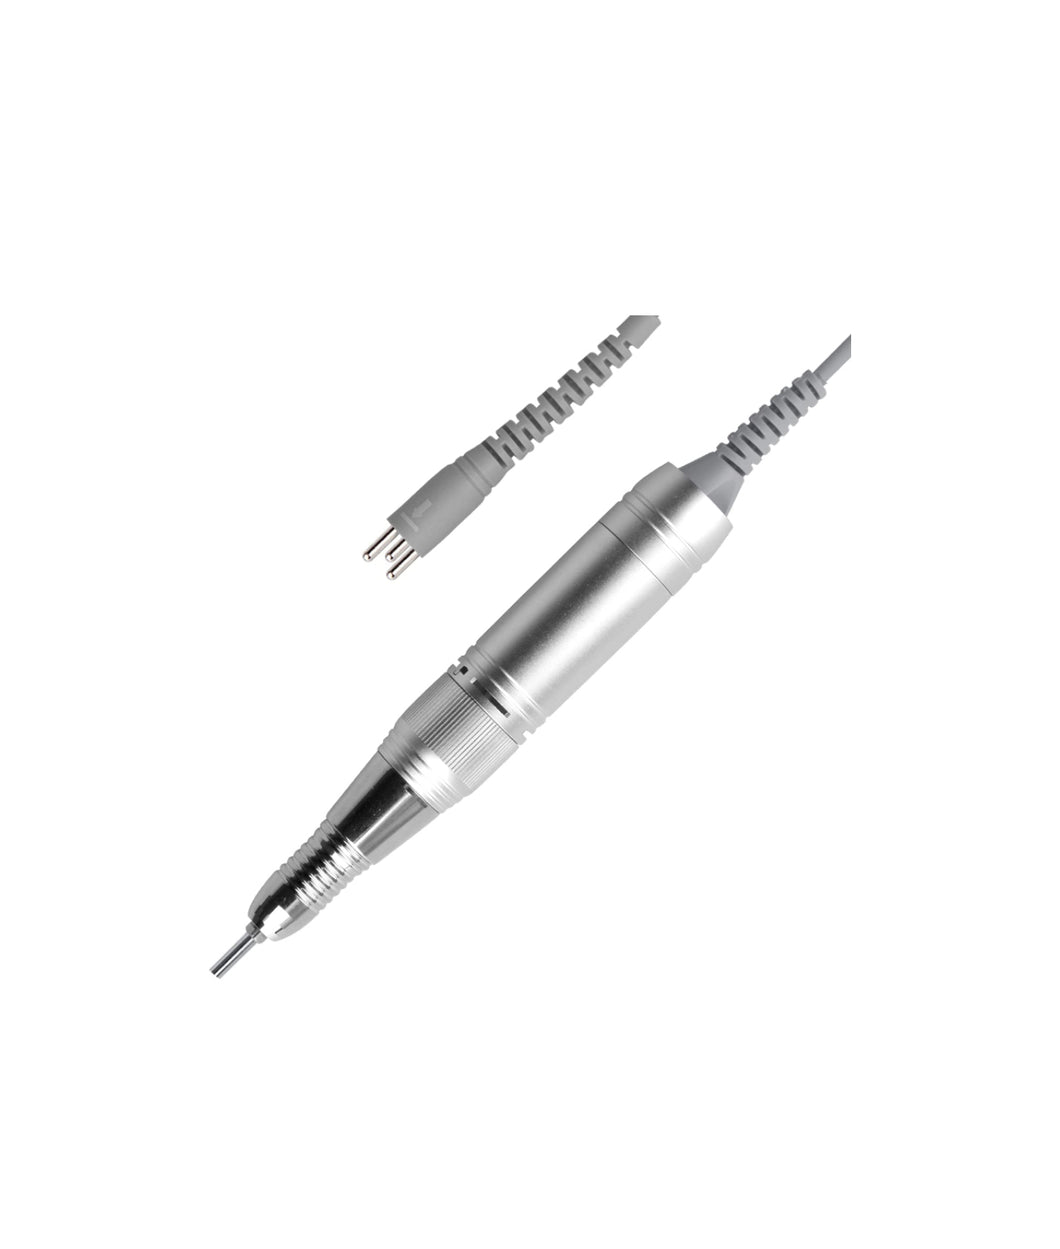 30000 RPM E-File Handpiece Replacement (3 Prong)